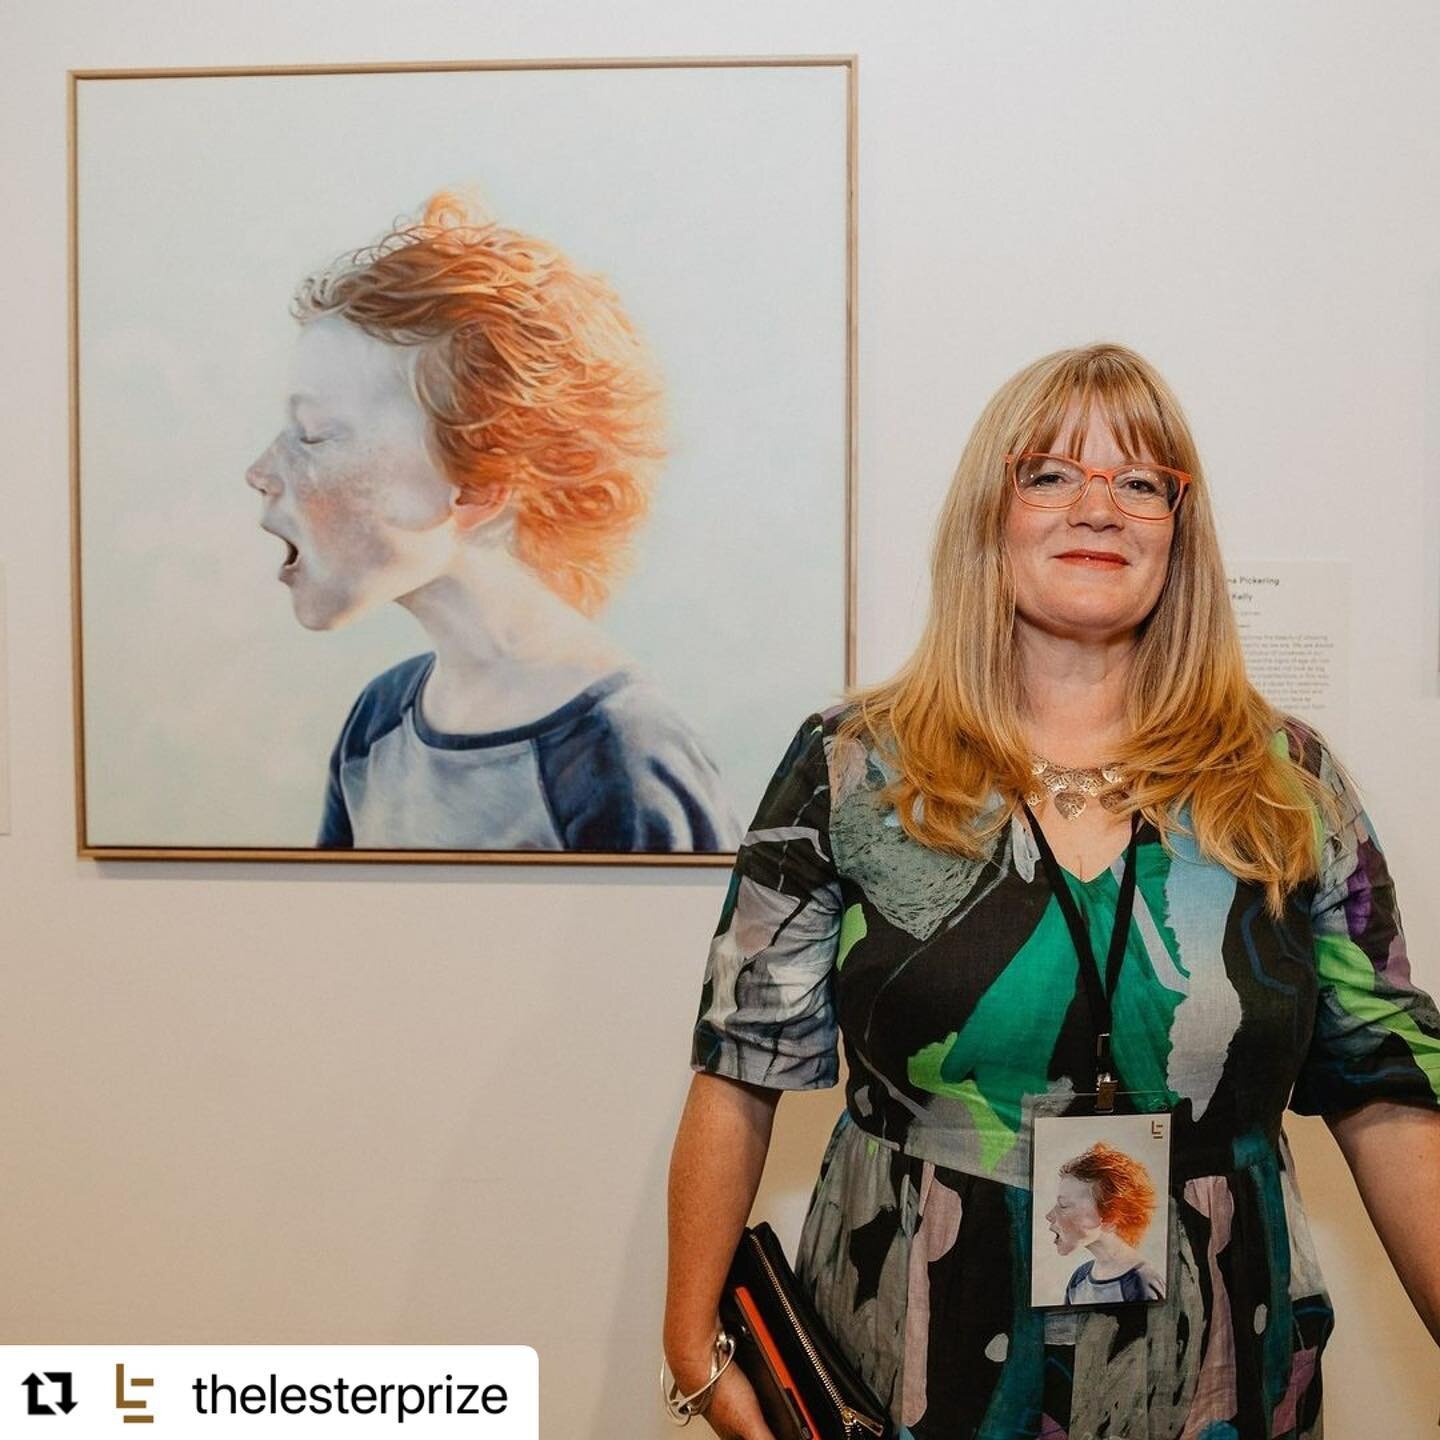 At the opening for the Lester Prize 2022 in October. So lovely to meet the other artists and the amazing team behind the Lester Prize.

Repost @thelesterprize